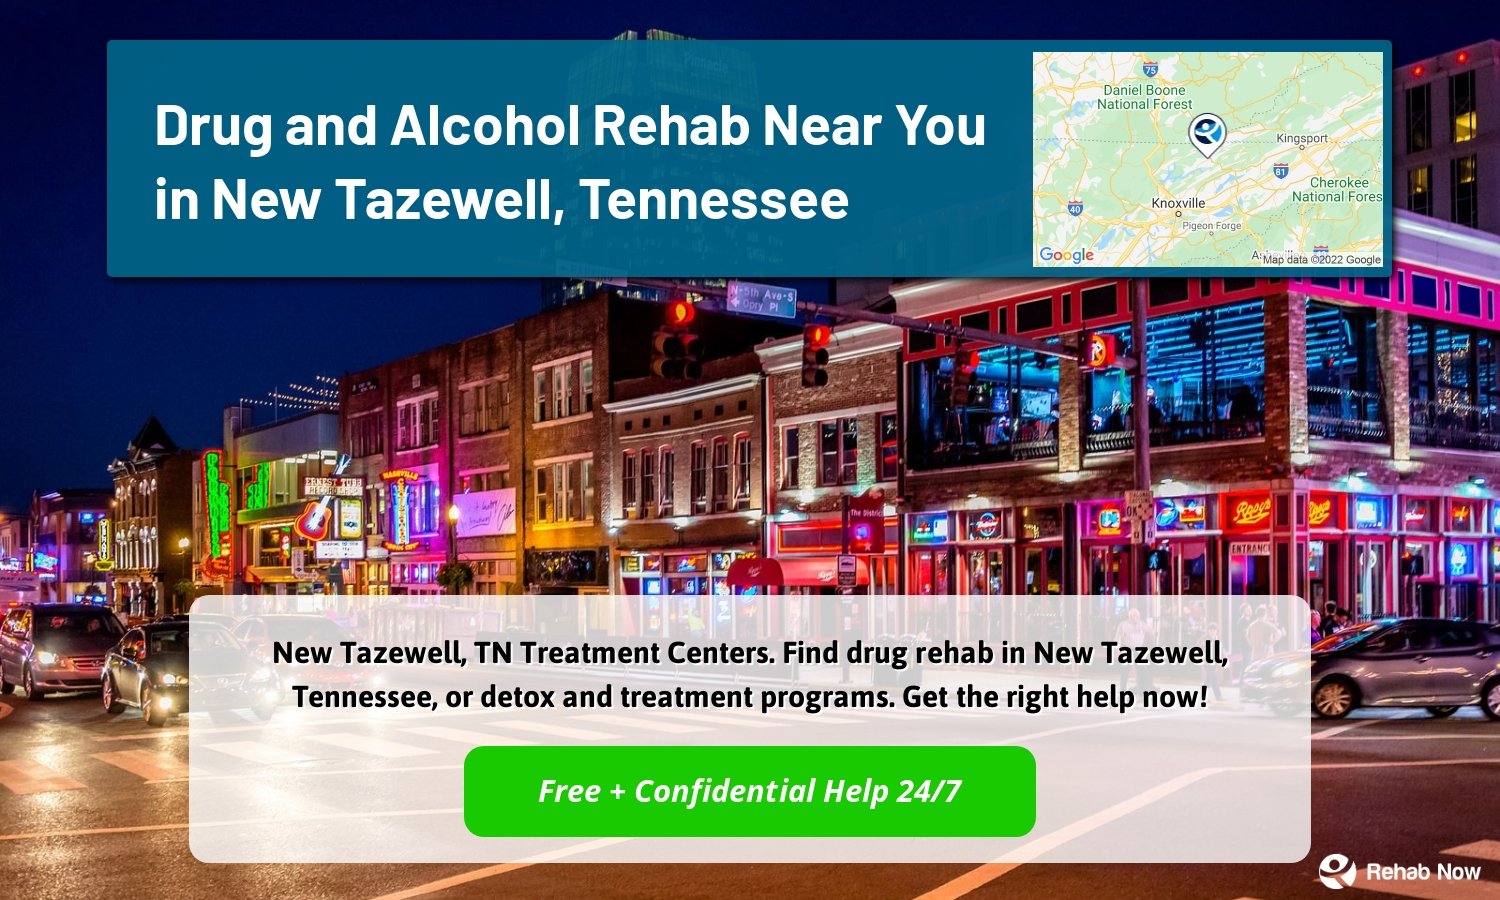 New Tazewell, TN Treatment Centers. Find drug rehab in New Tazewell, Tennessee, or detox and treatment programs. Get the right help now!